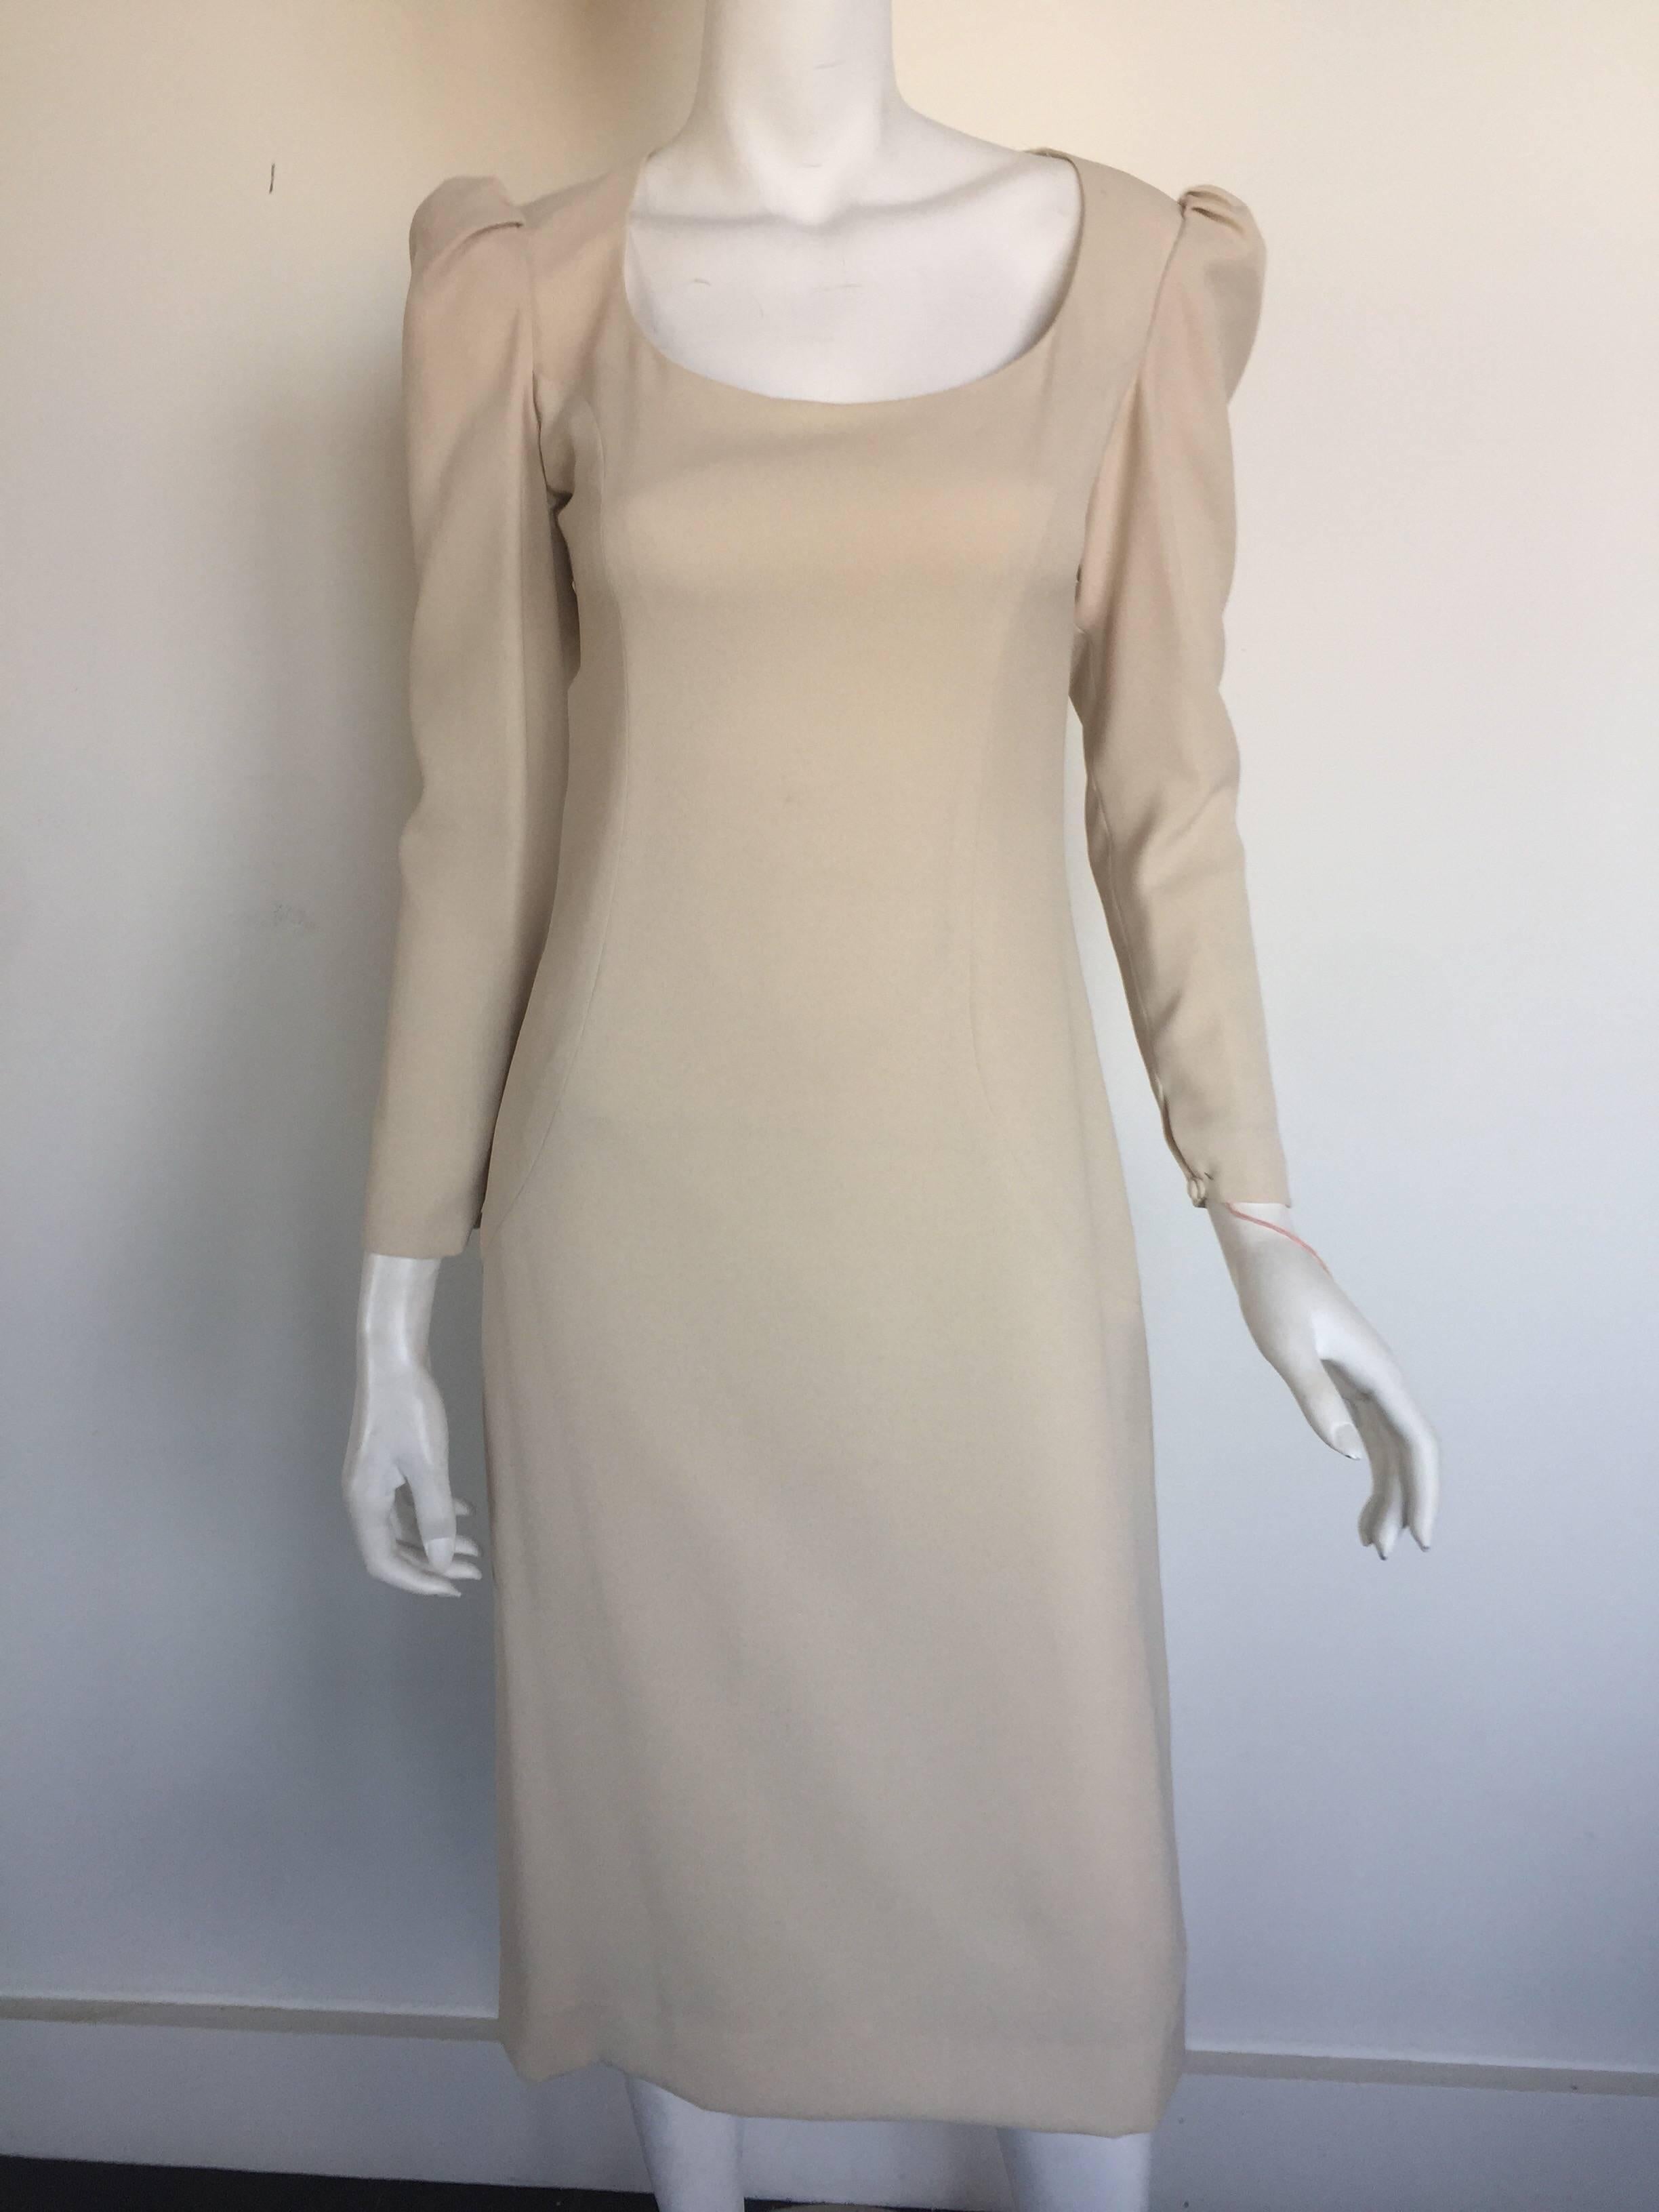 This Estevez is an off wife bone color.  It is a sheeth dress with feminine ruffled shoulders and long sleeves.  It has an open back with three both closures.  It is a size 4 but please check measurements.  